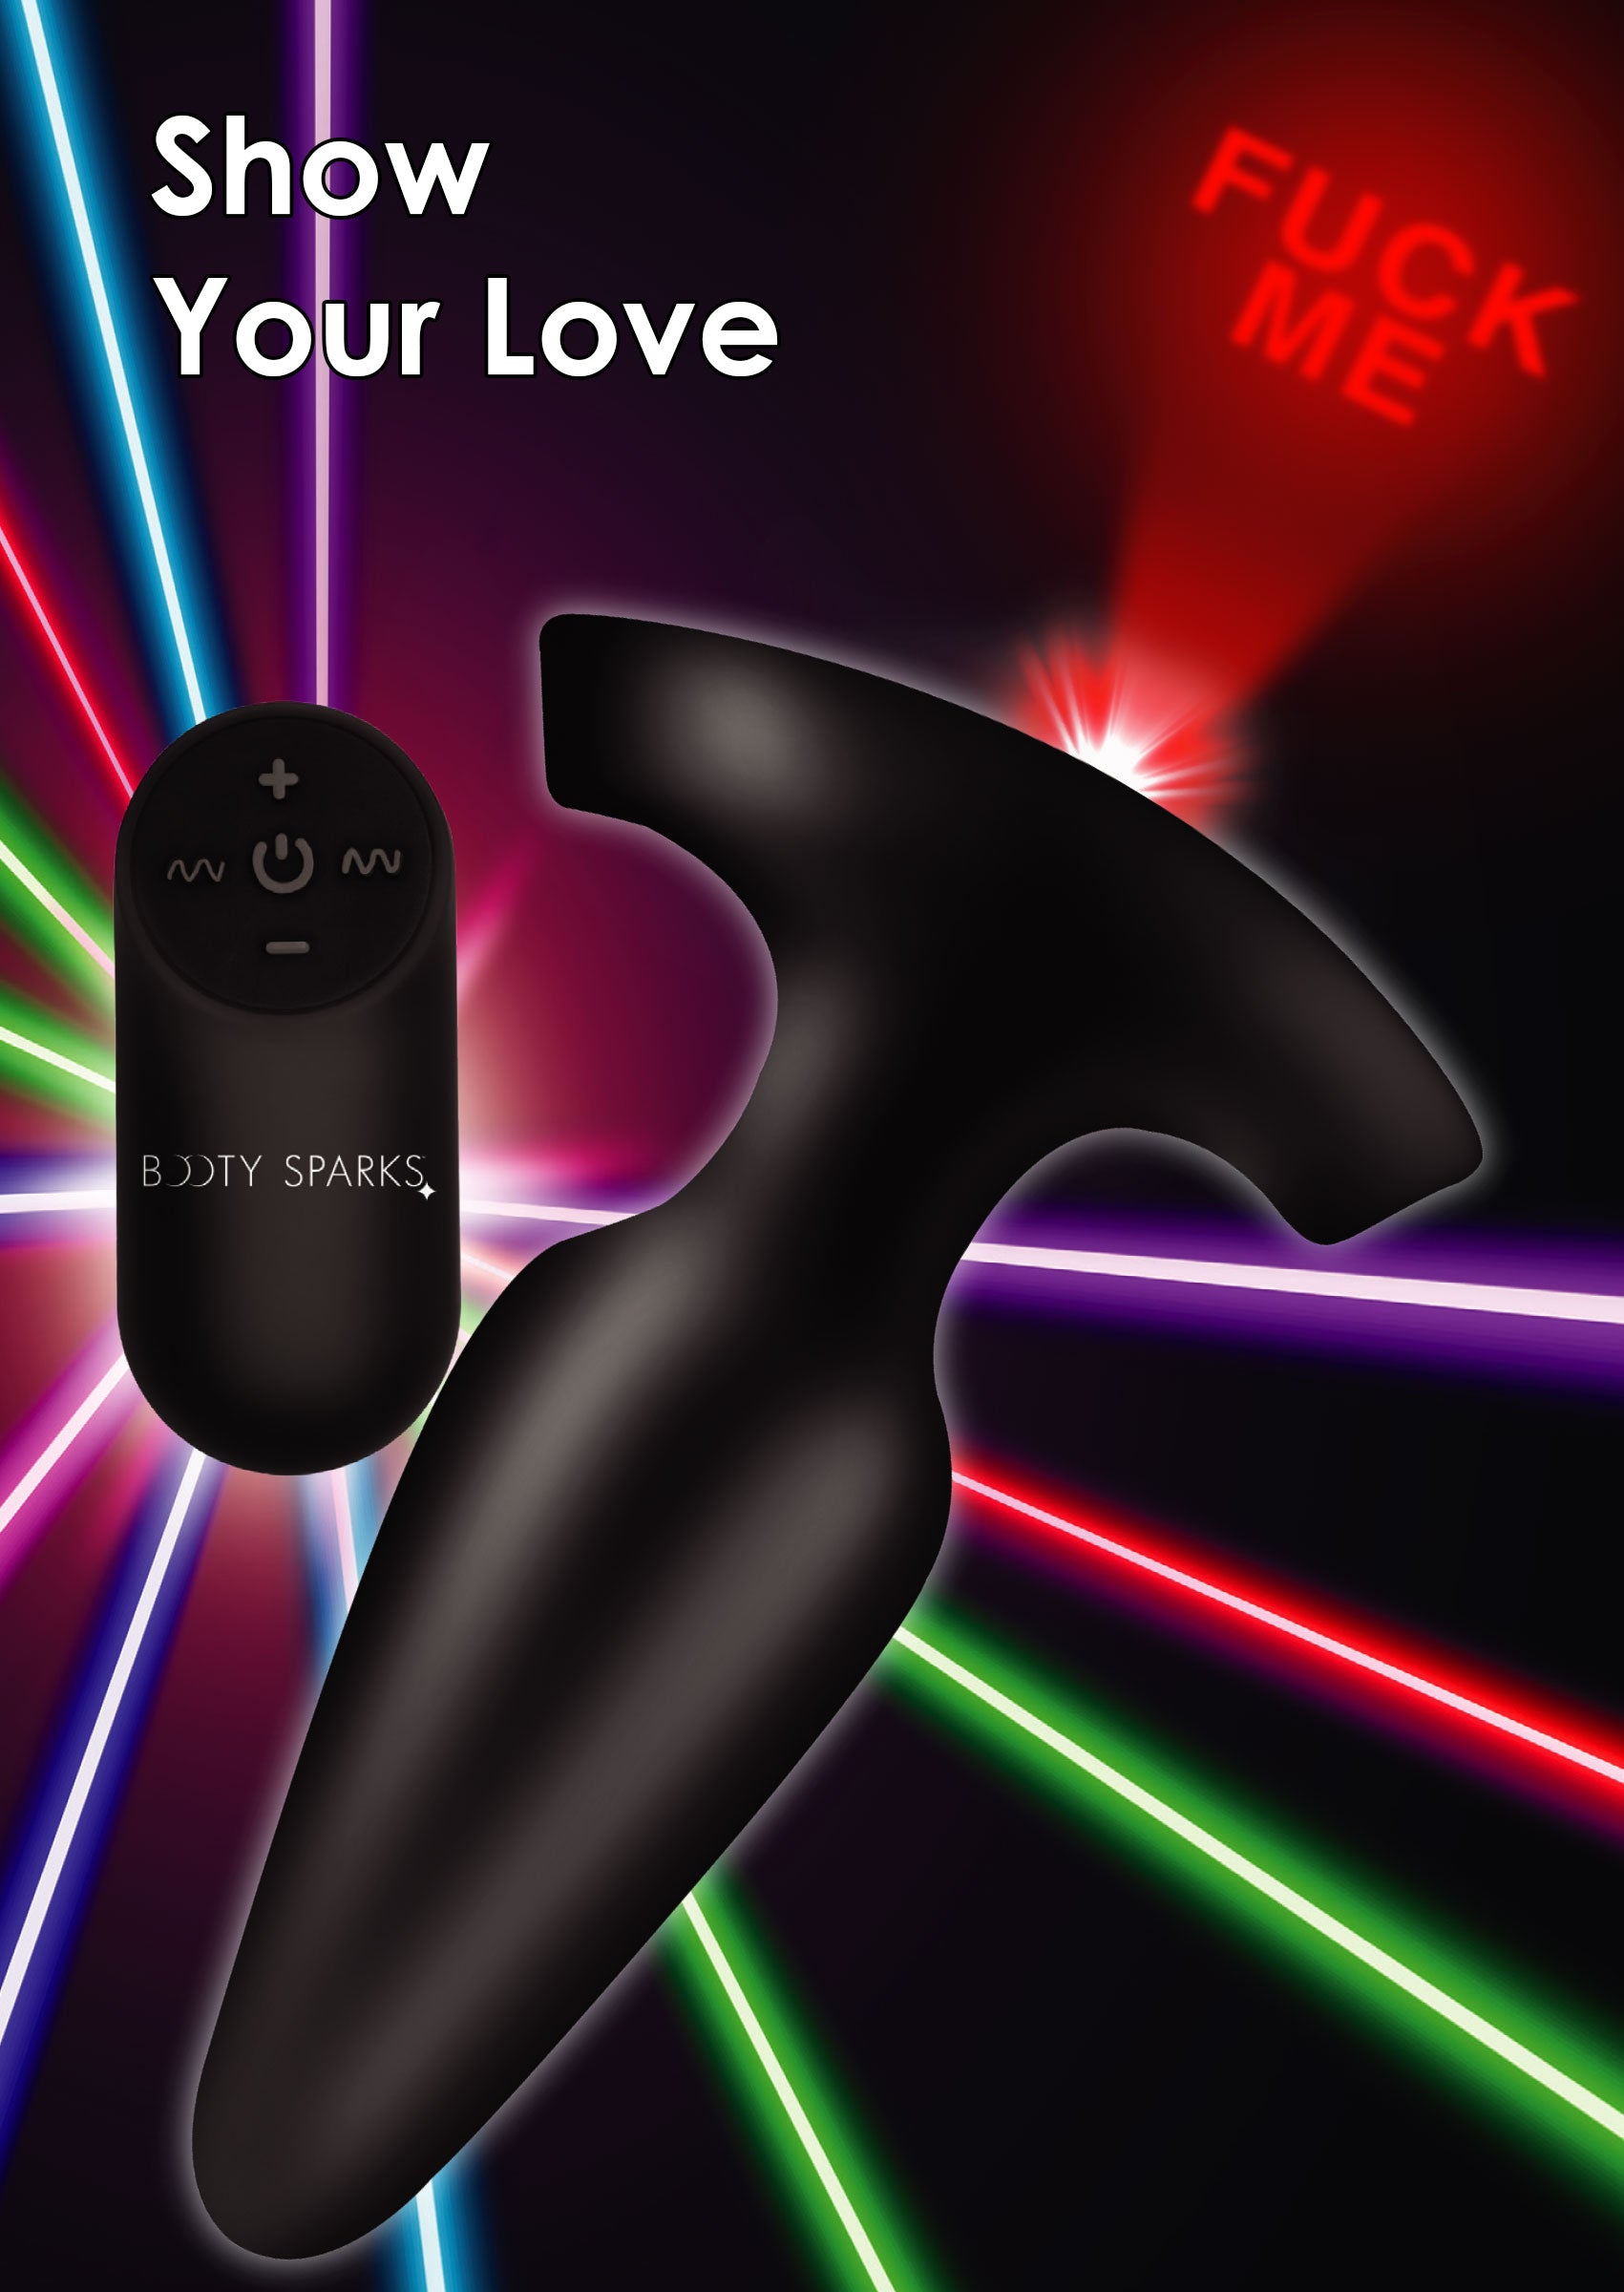 28X Laser Fuck Me Silicone Anal Plug with Remote Control